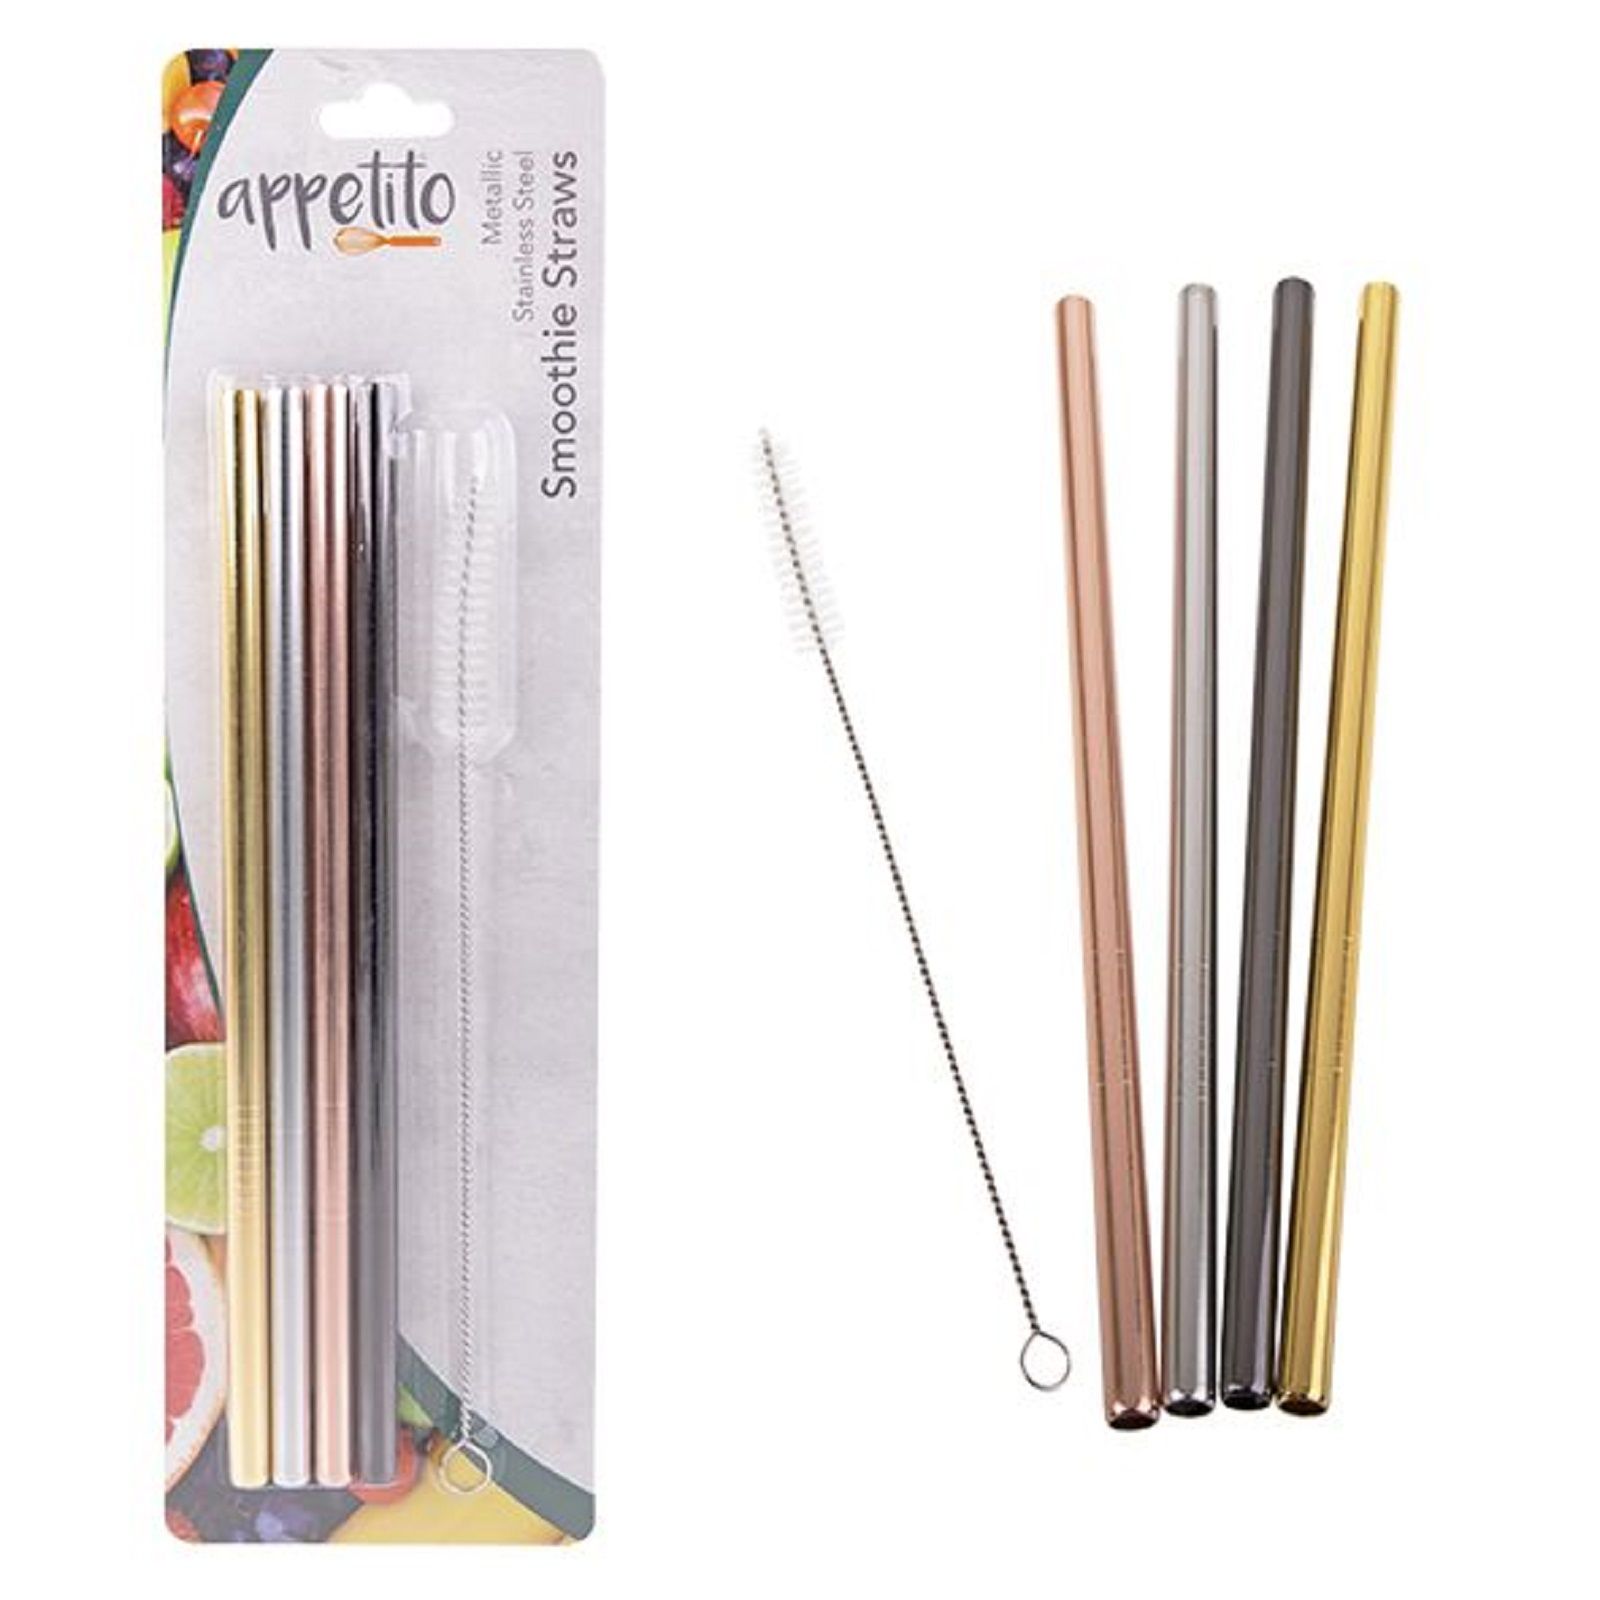 Appetito Set 4 METALLIC Straight Stainless Steel Straws + Cleaning Brush